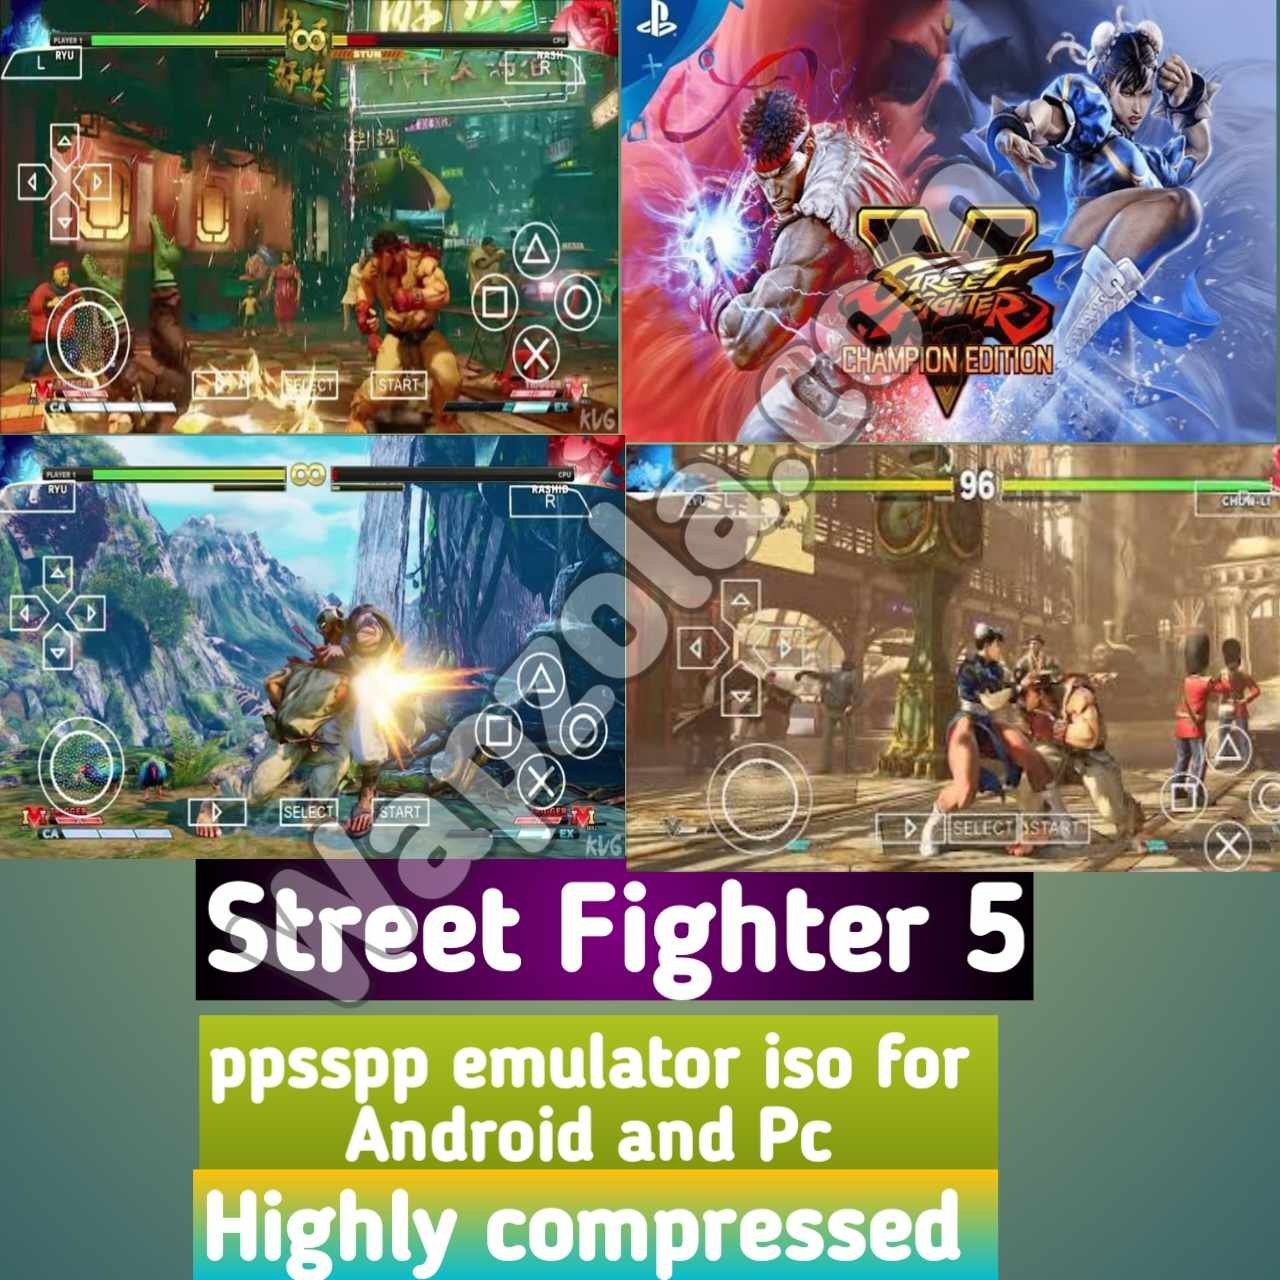 You are currently viewing [Download] Street Fighter 5 ppsspp emulator – PSP APK Iso highly compressed 40MB